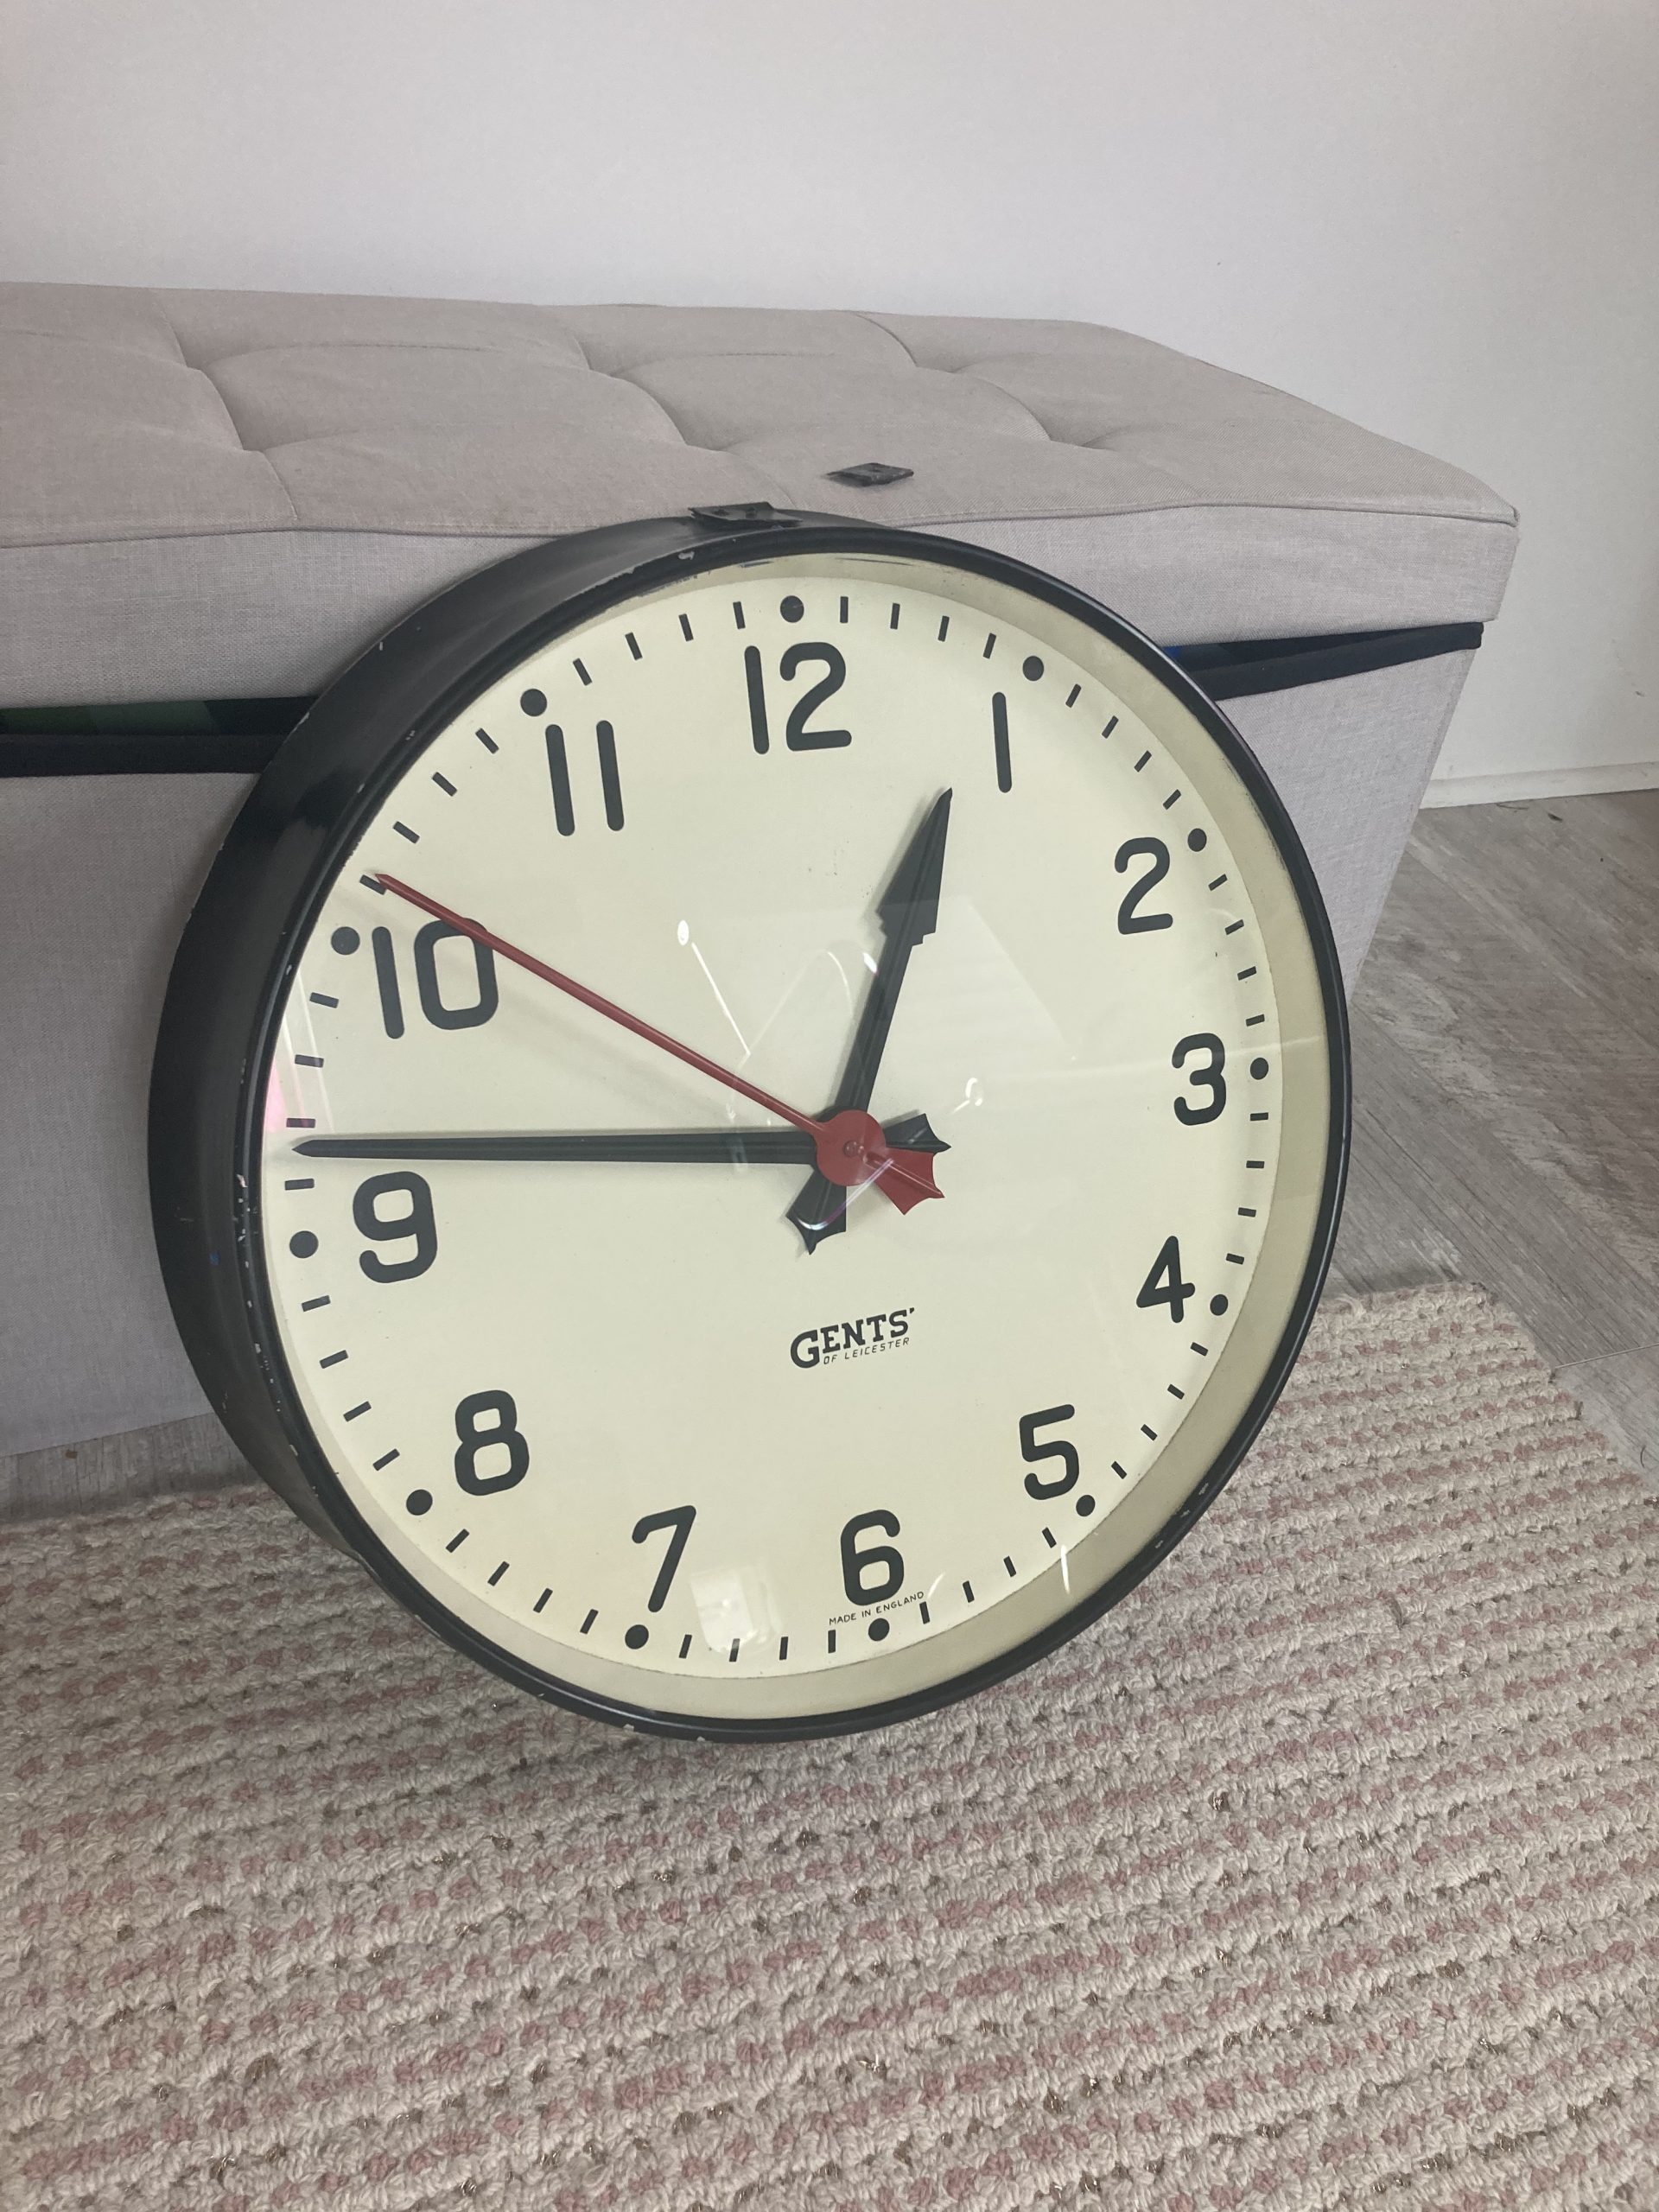 Gents' of Leicester 18-inch wall clock with secondhand